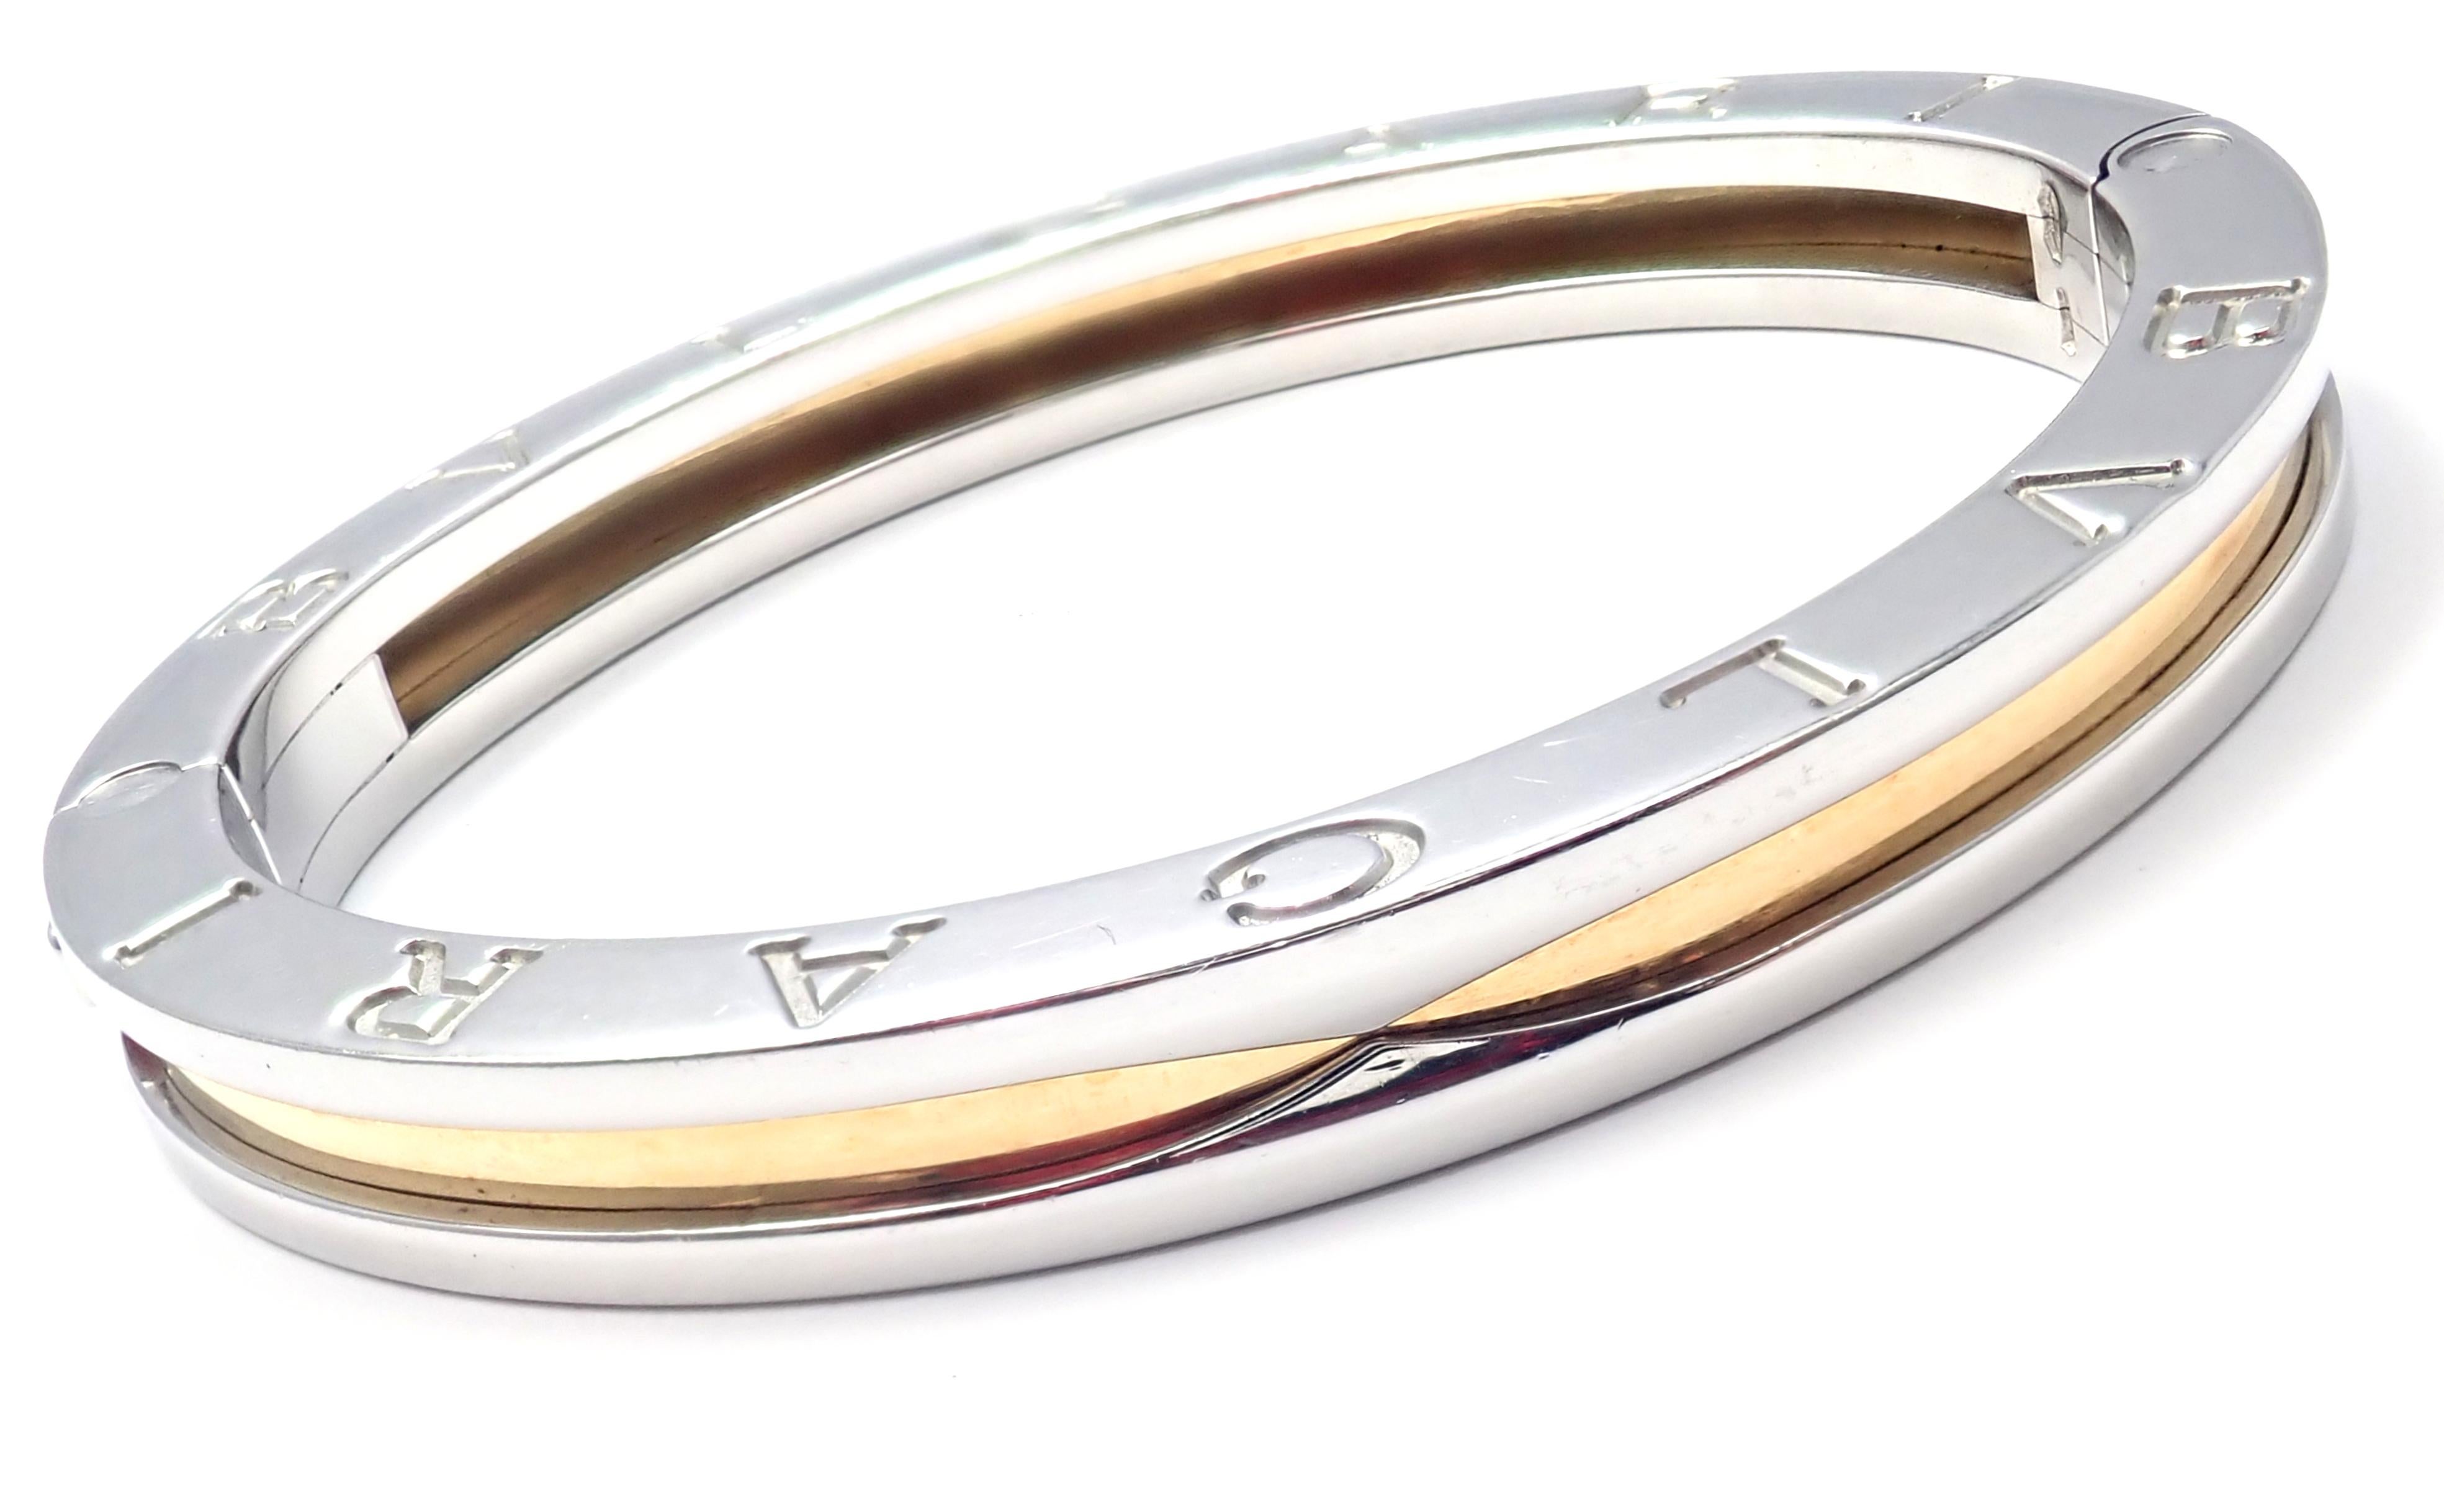 18k Yellow Gold And Stainless Steel B-Zero Bangle Bracelet by Bulgari.
This bracelet is size small.
Details: 
Length: fits from 6.26